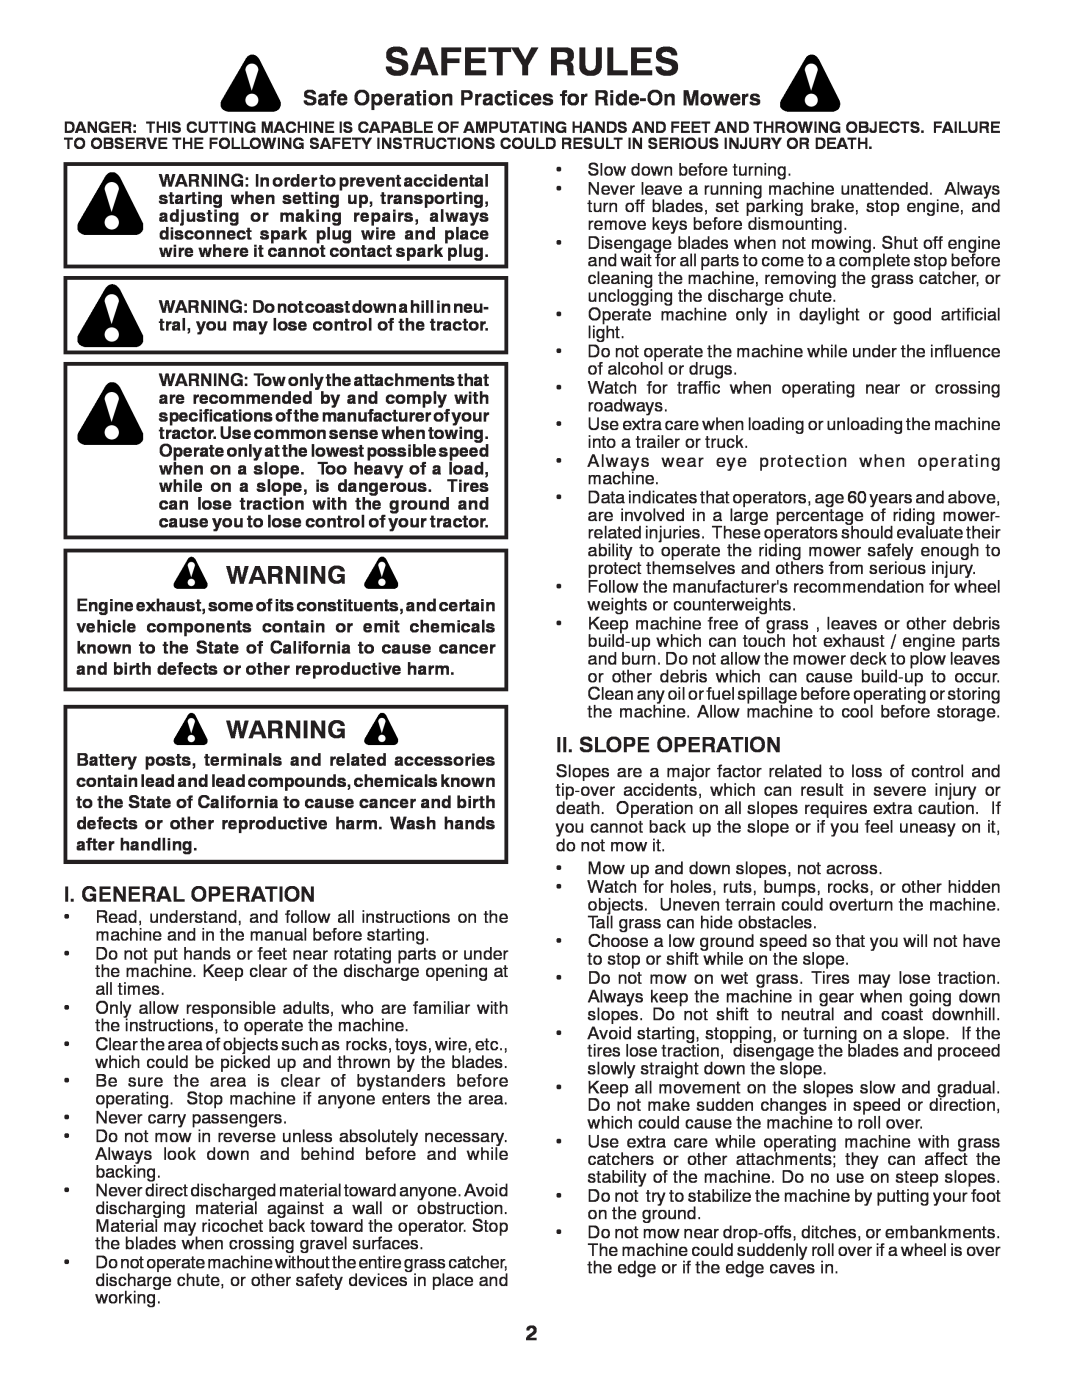 Poulan 433432 manual Safety Rules, Safe Operation Practices for Ride-On Mowers, I. General Operation, Ii. Slope Operation 